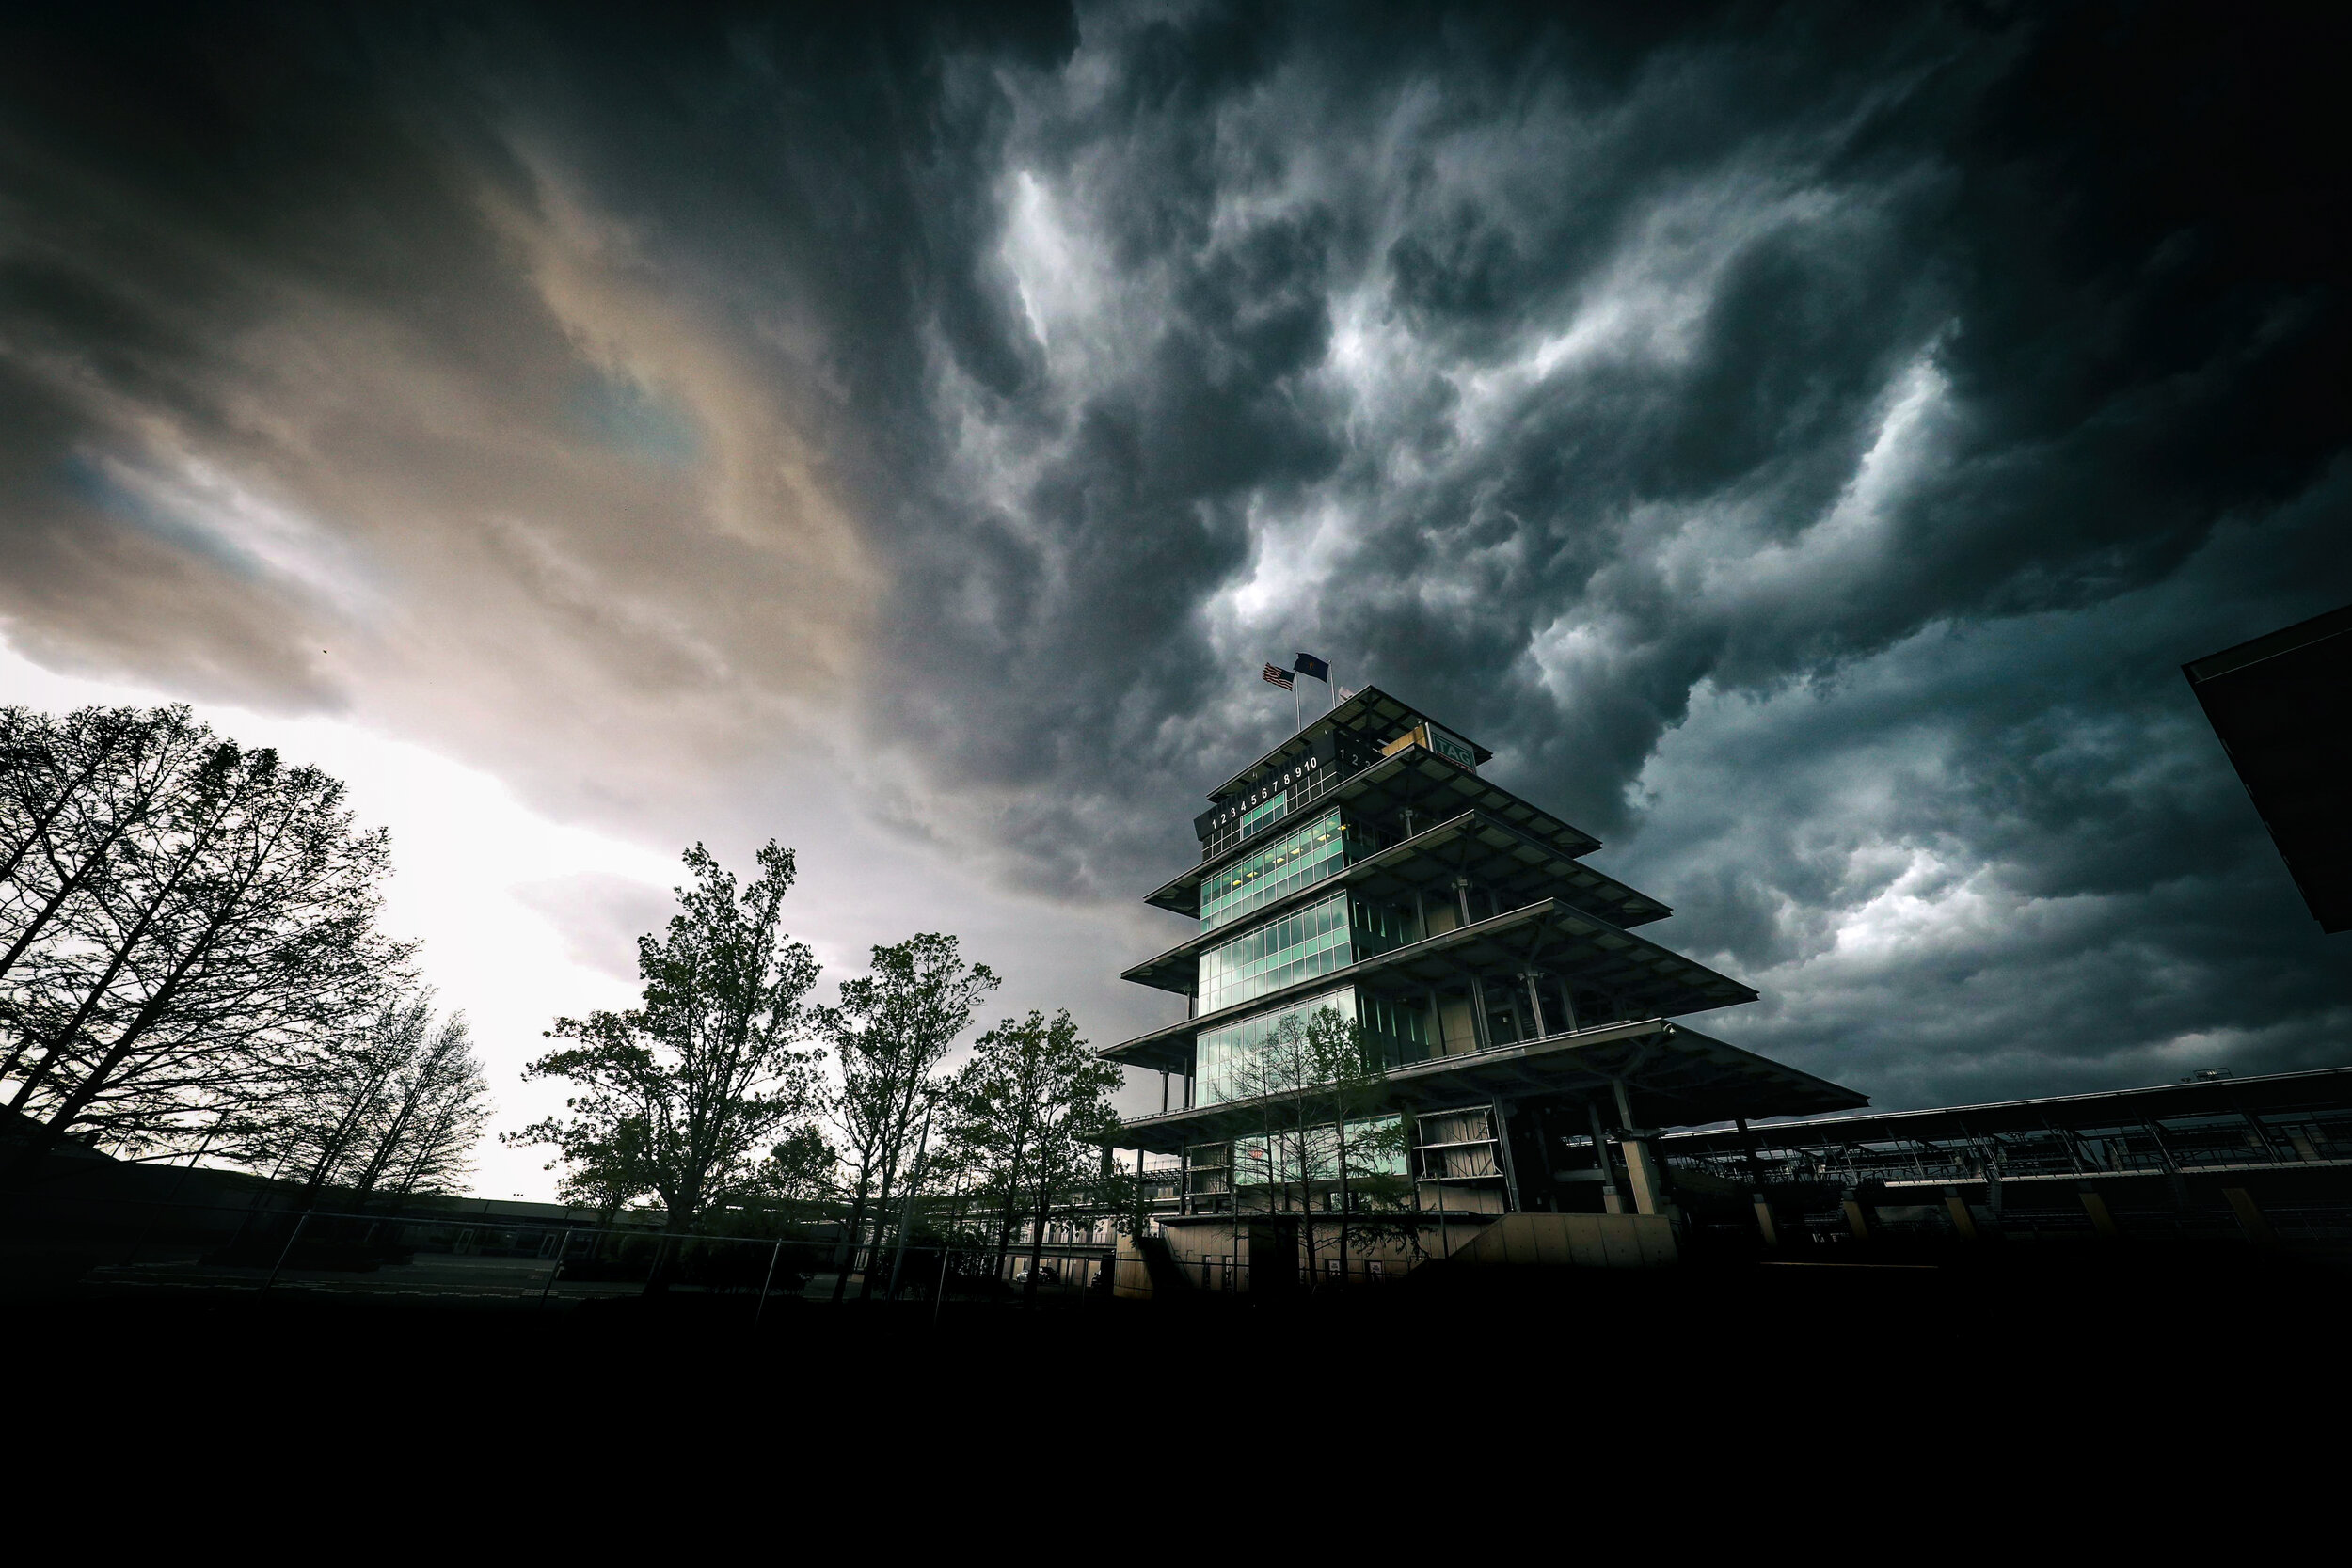  Probably the most sever cloud cover I’ve ever photographed at the track. This was shot the second week of May this year. We definitely would have been checkered flag for the day. It rained and rained. 